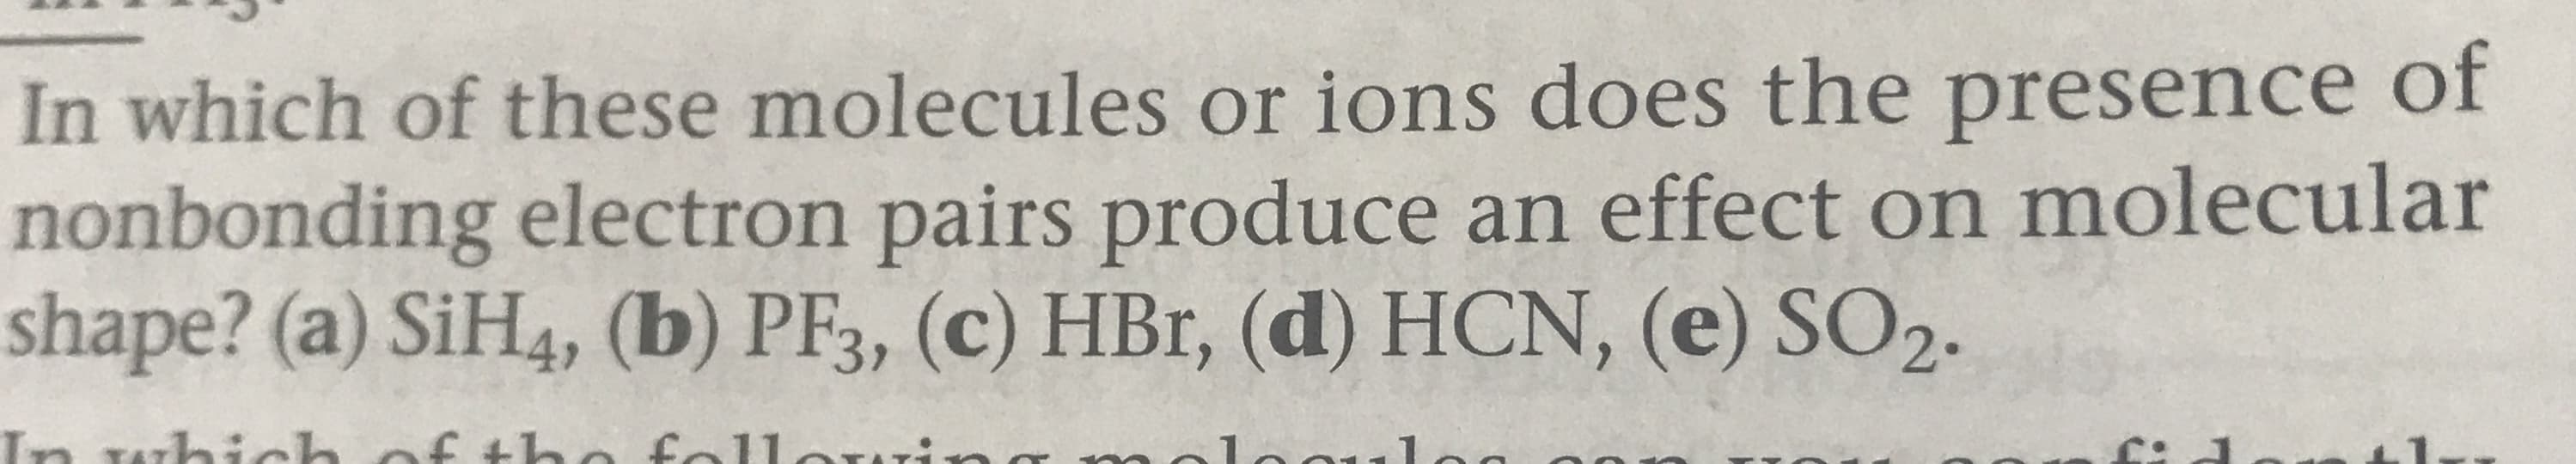 In which of these molecules or ions do es the presence of
nonbonding electron pairs produce an effect on molecular
shape? (a) SiH4, (b) PF3, (c) HBr, (d) HCN, (e) SO2.
f tho fallorr:-
